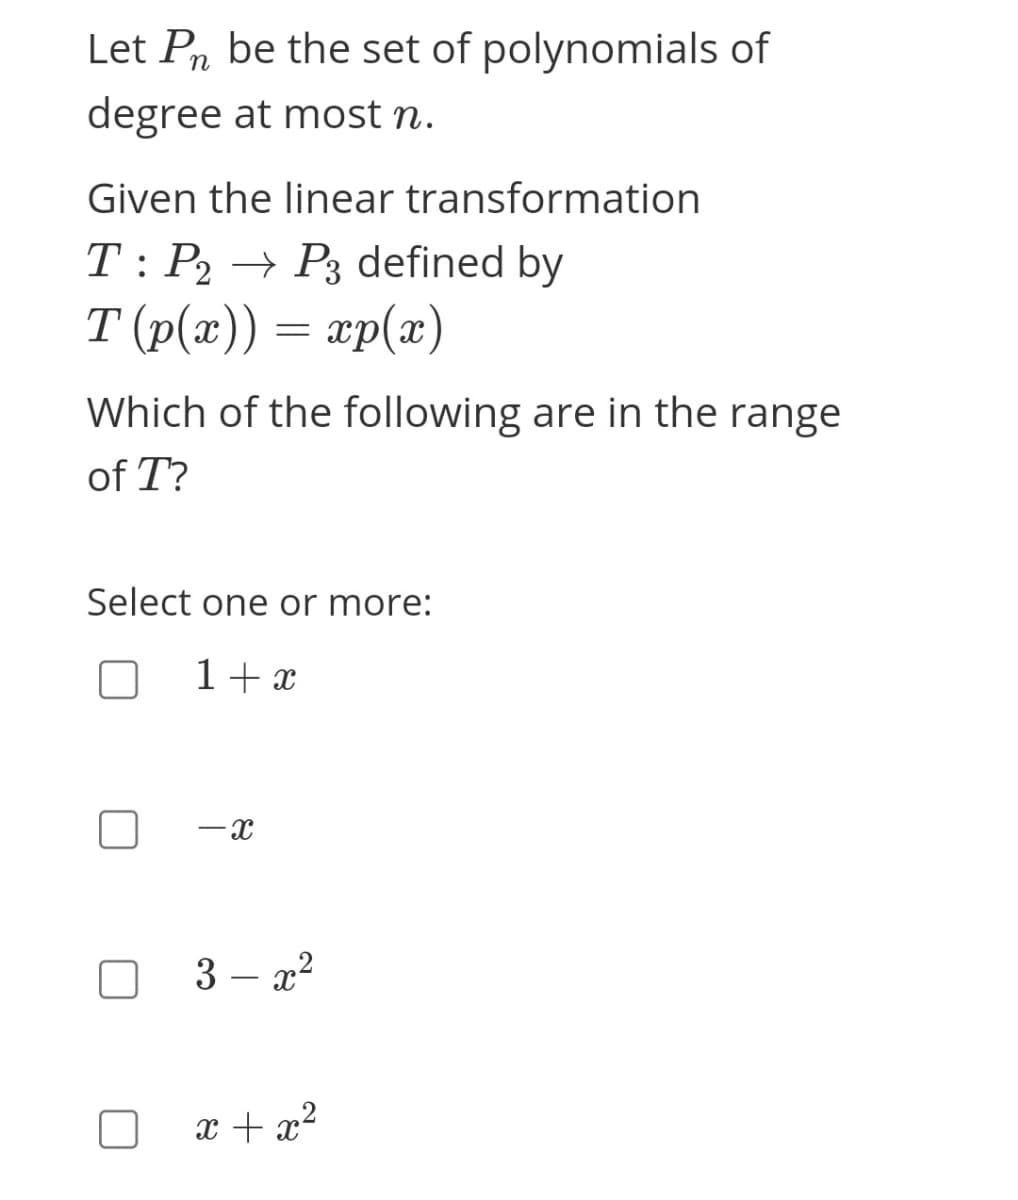 Let Pn be the set of polynomials of
degree at most n.
Given the linear transformation
T: P2 → P3 defined by
T (p(x)) = xp(x)
Which of the following are in the range
of T?
Select one or more:
1+ x
-x
3 – x?
x + x²
